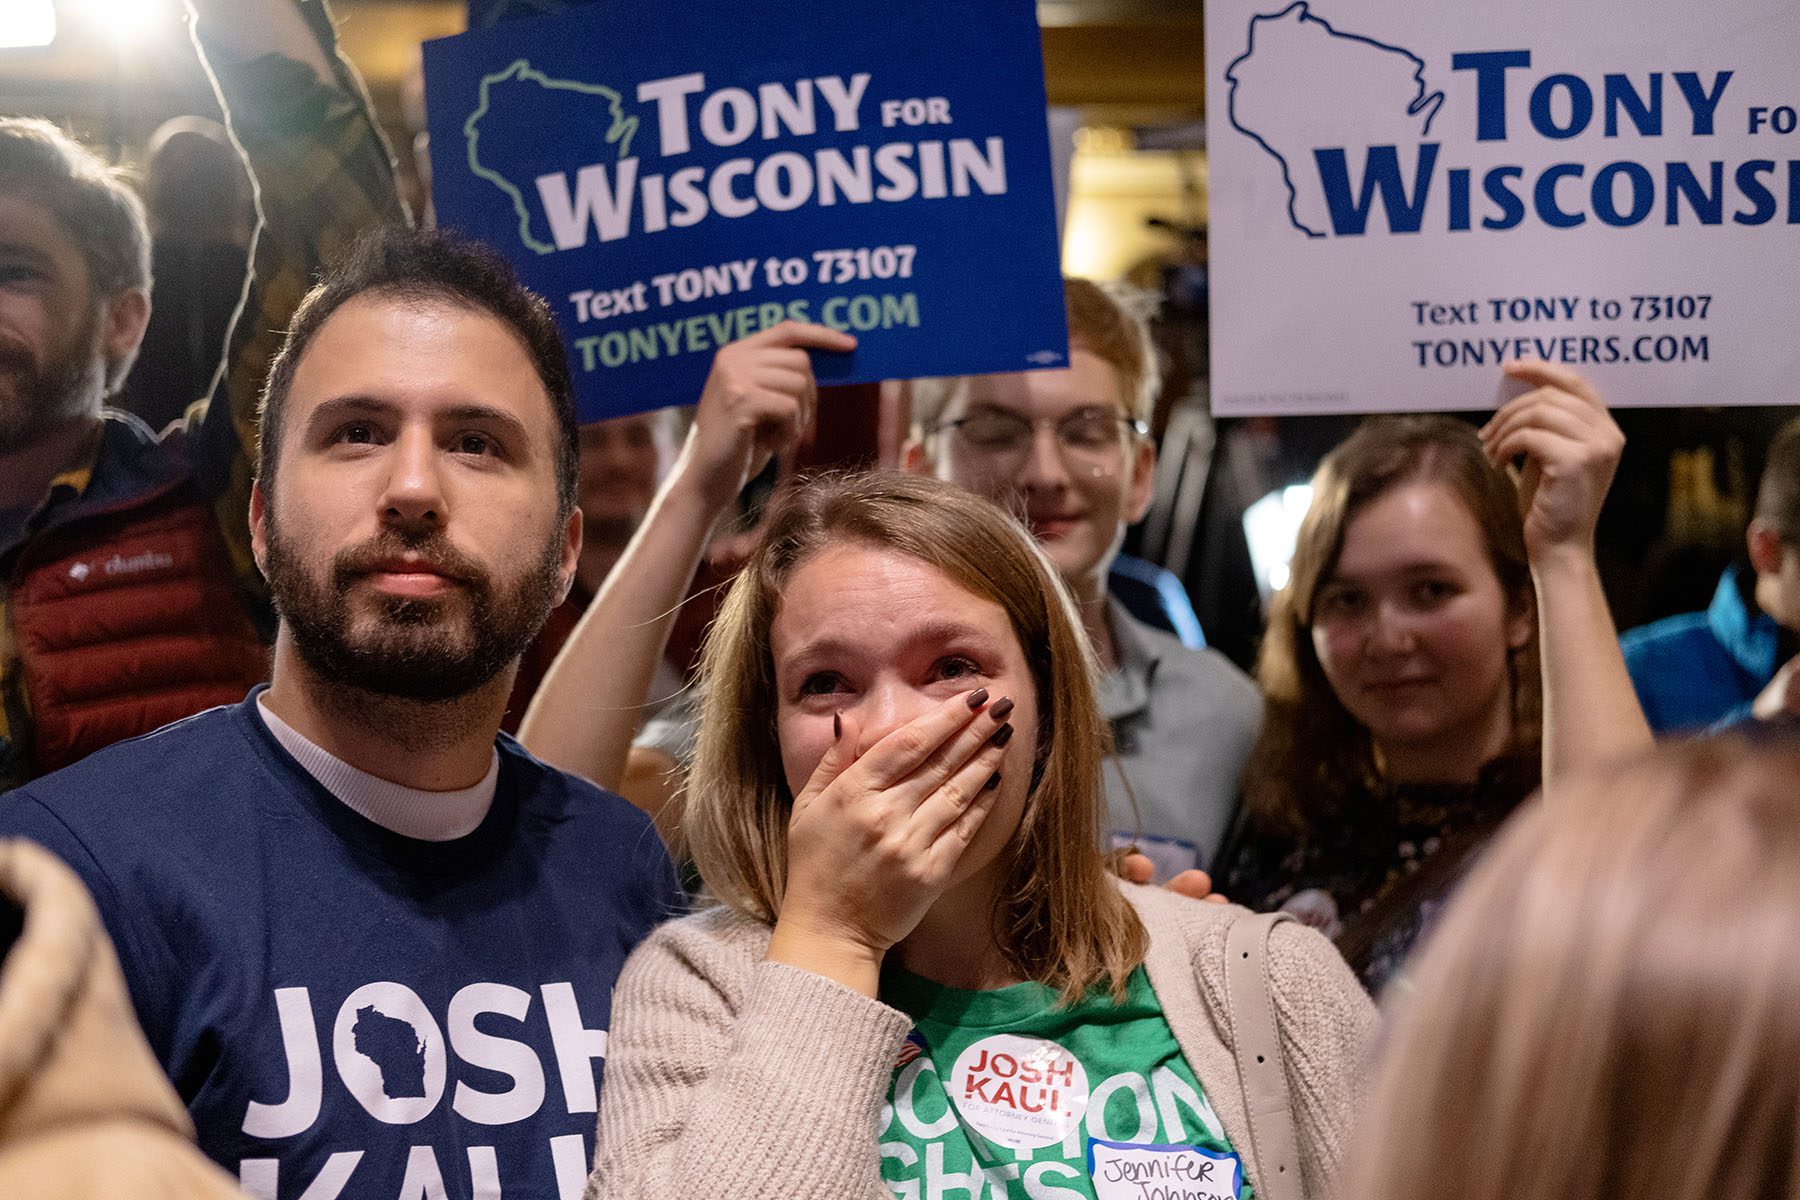 A woman looks emotional as she covers her face in disbelief as others smile and hold "Tony for Wisconsin" signs around her.